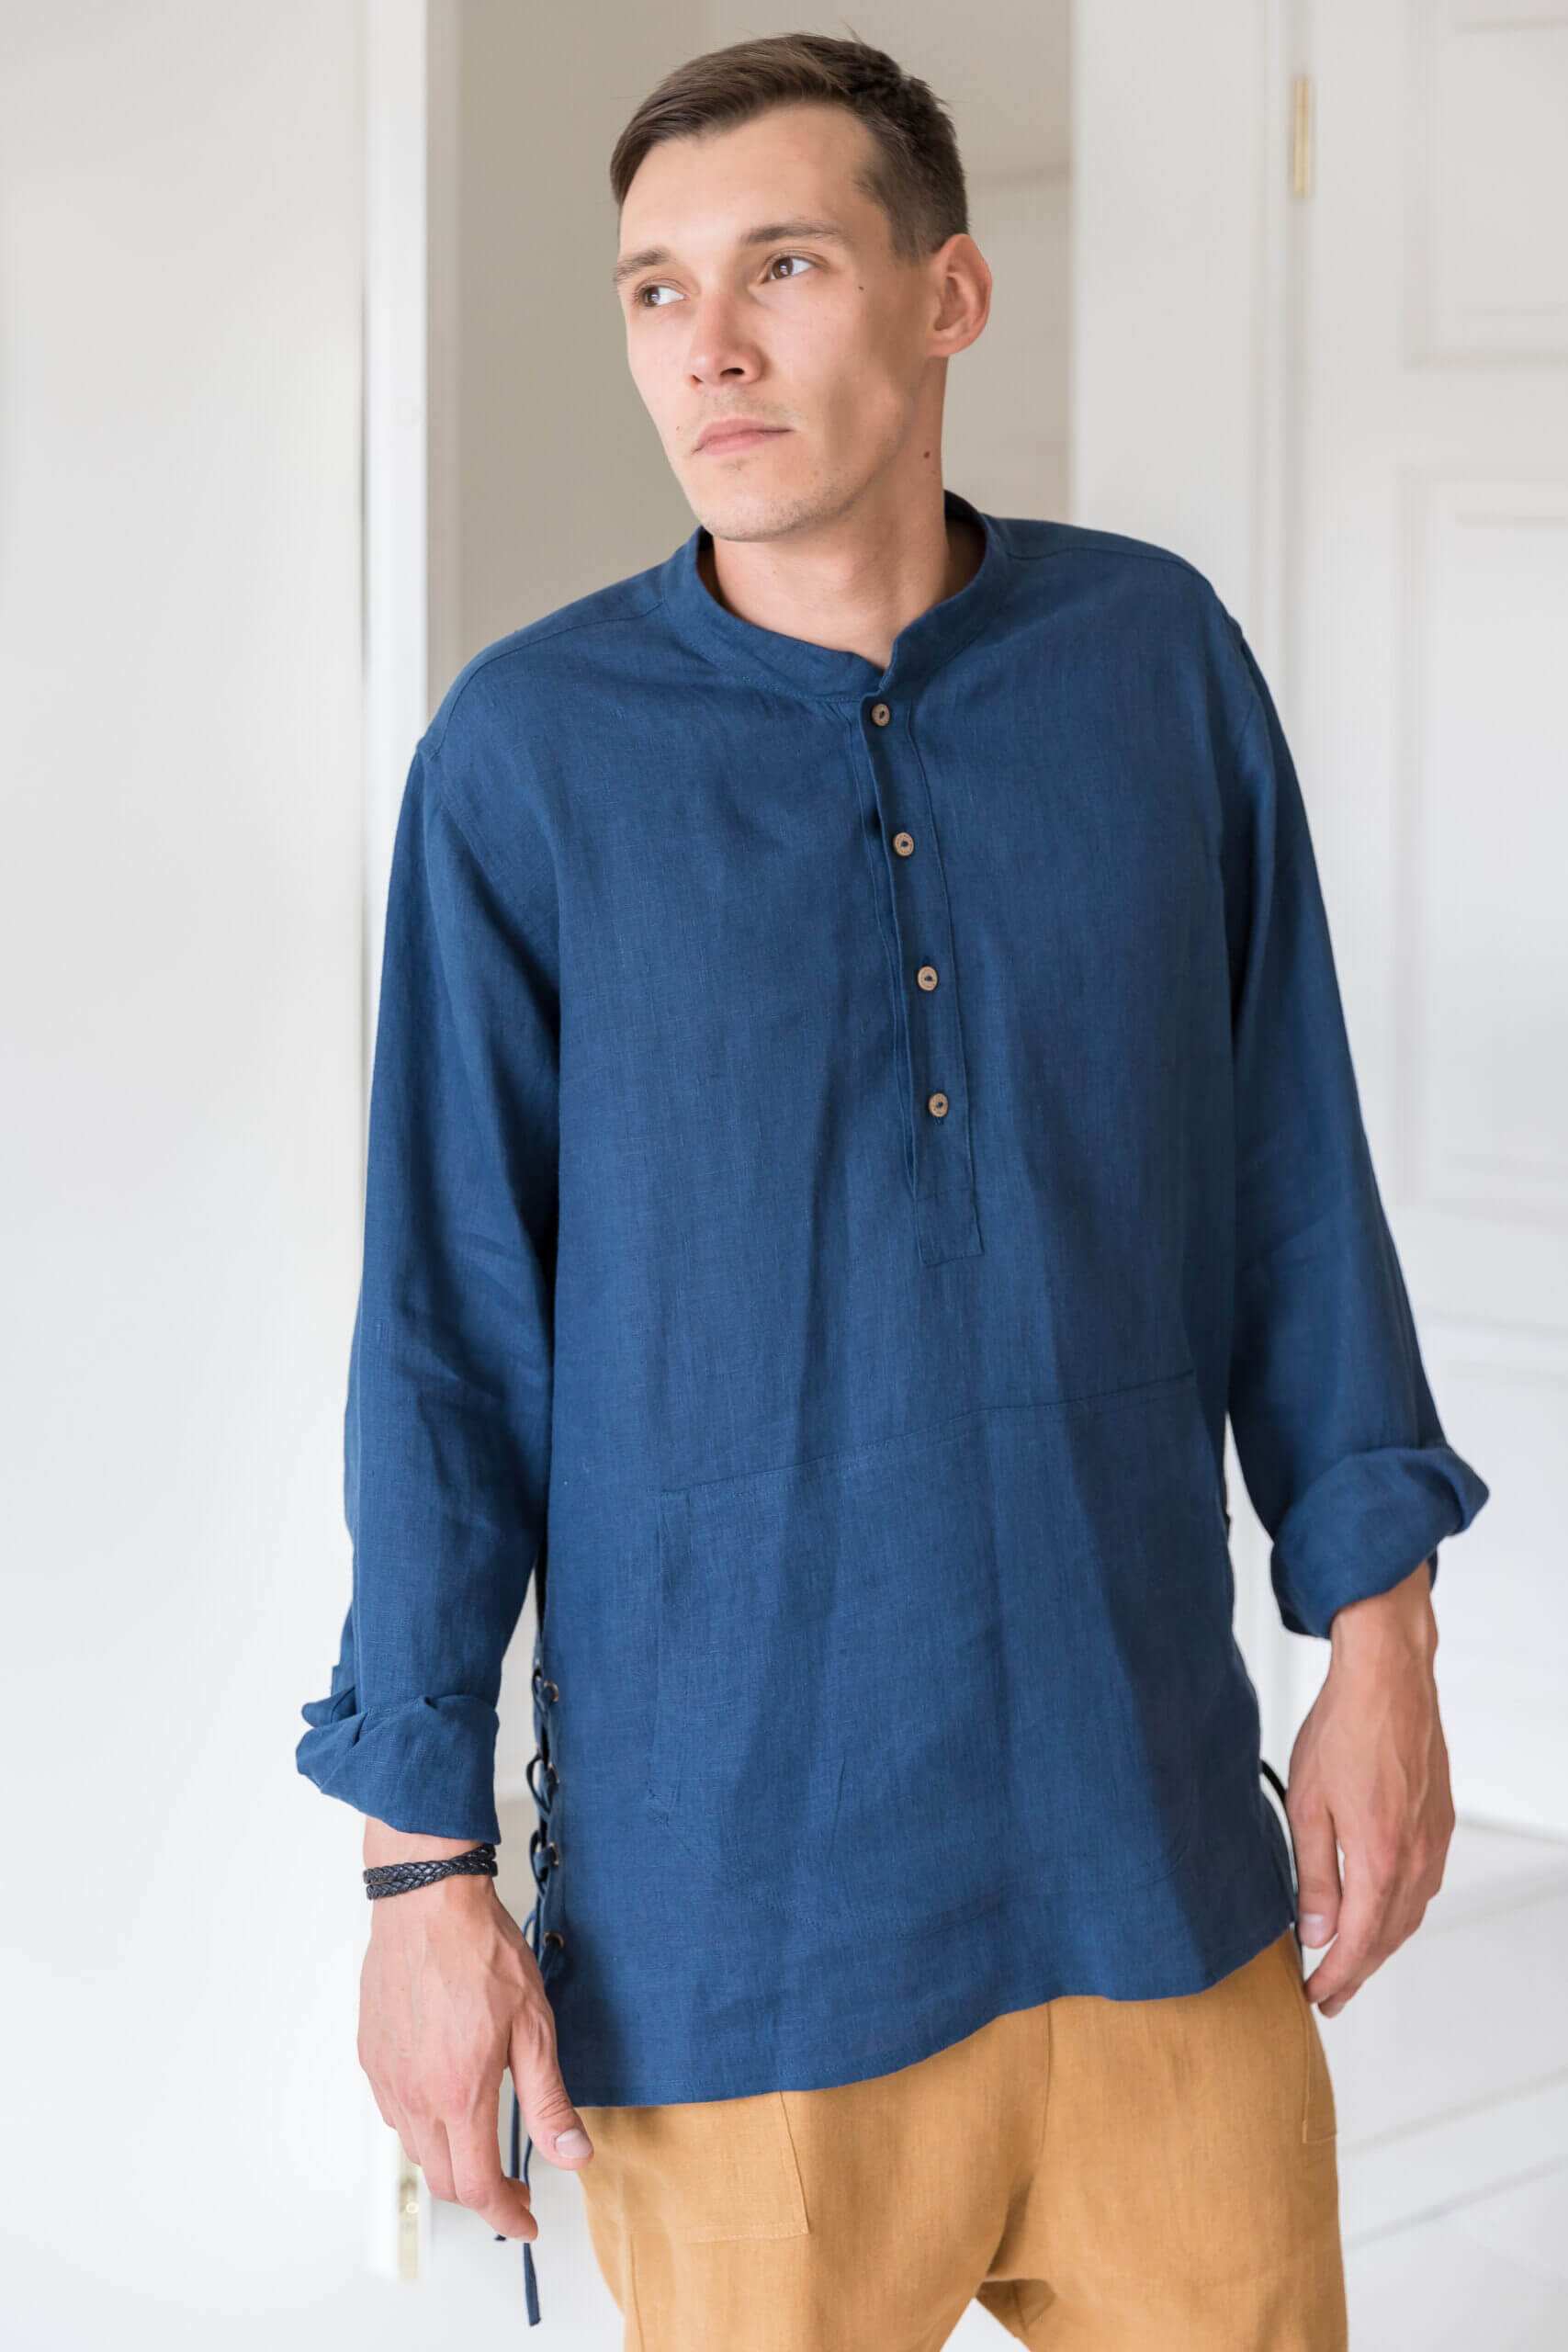 Stylish front view of the dark blue striped linen shirt